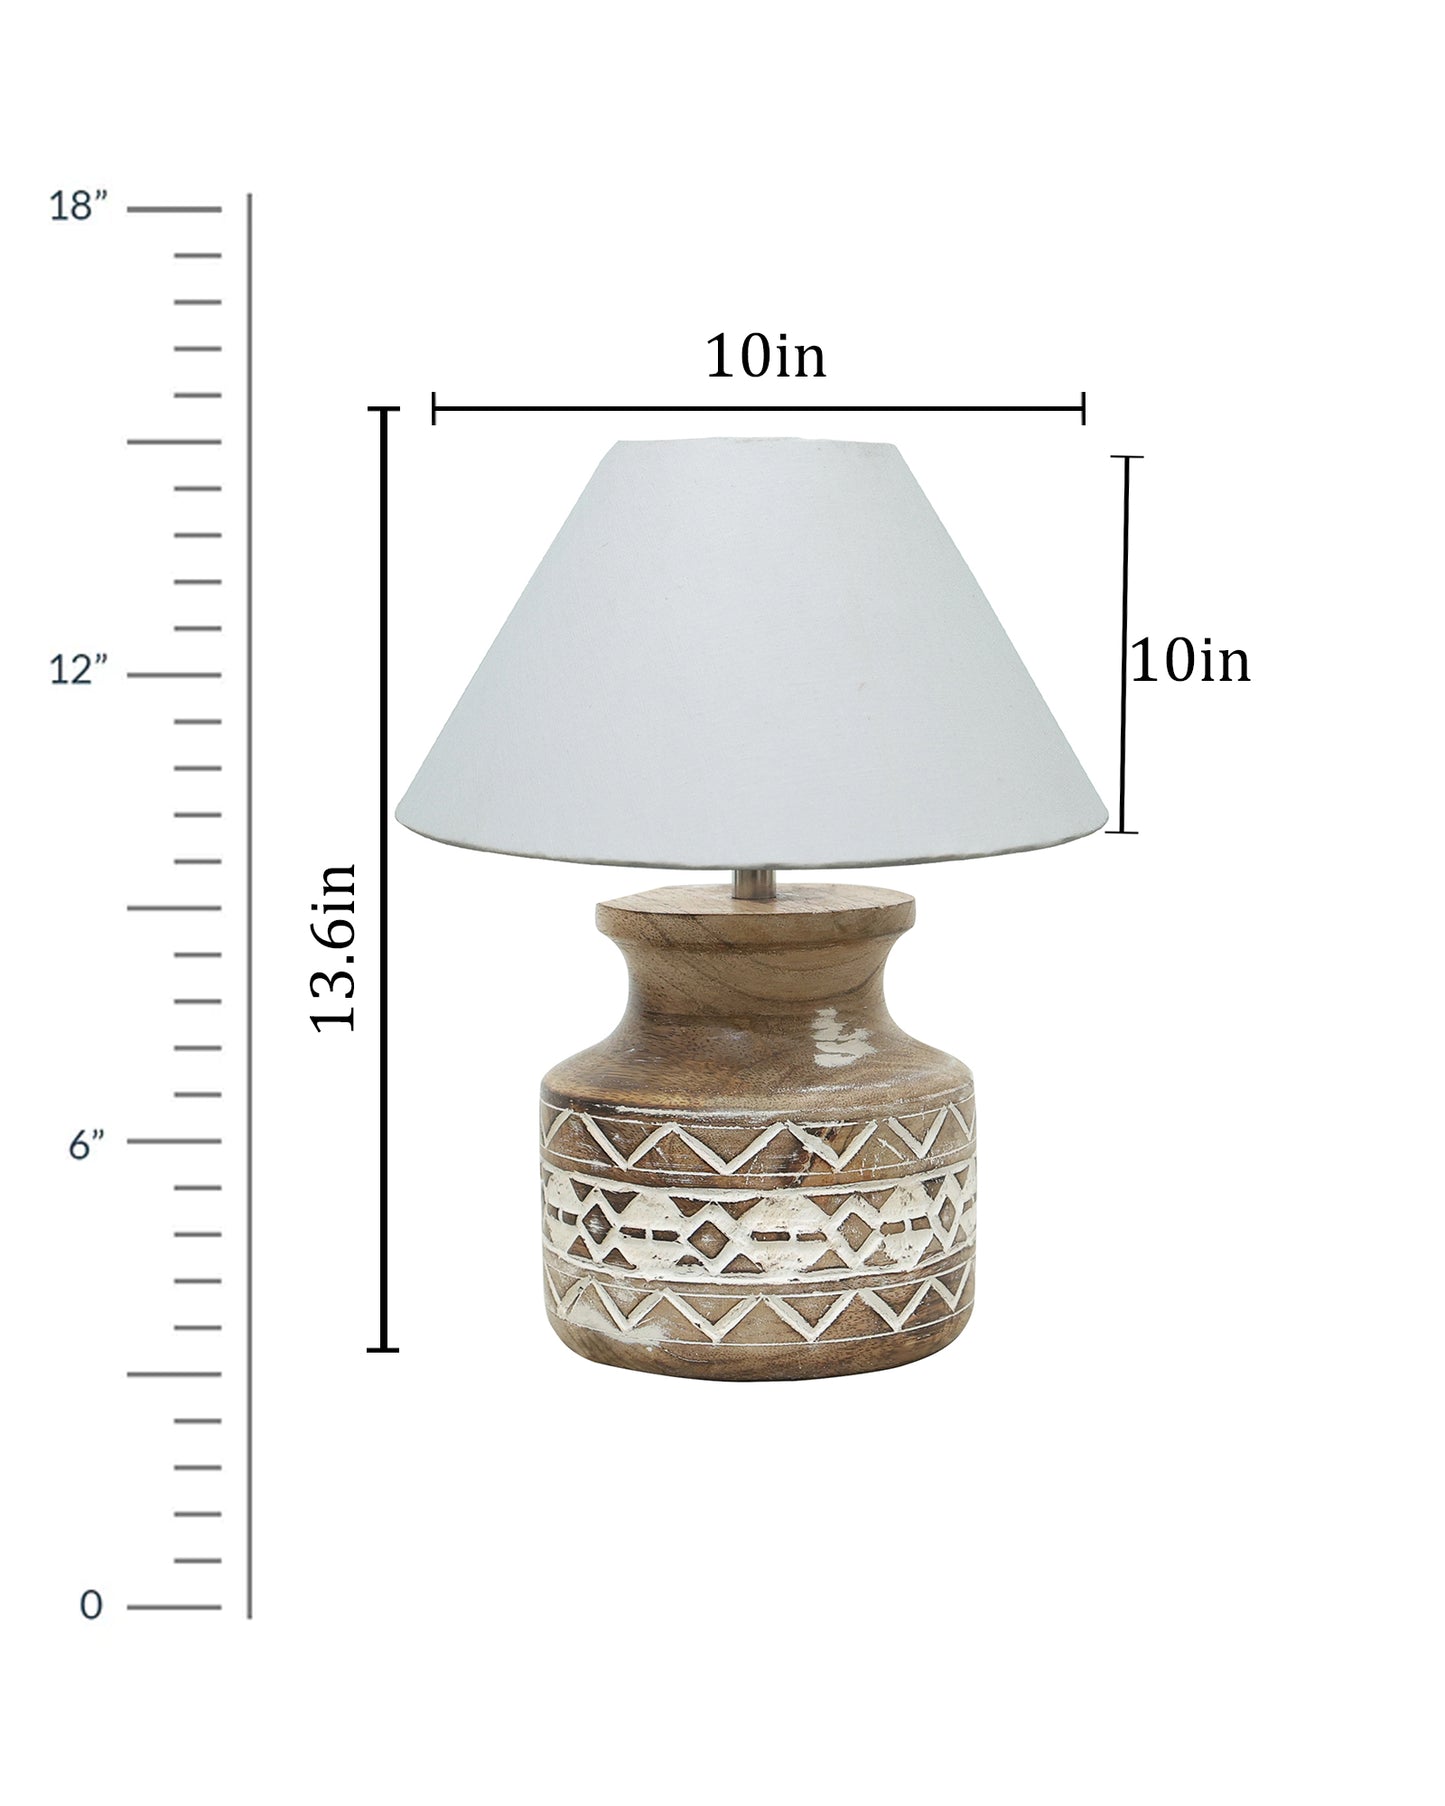 Wood Table Lamp, Modern Base Fabric Lampshade for Home Office Cafe Restaurant, Whitewash Pot